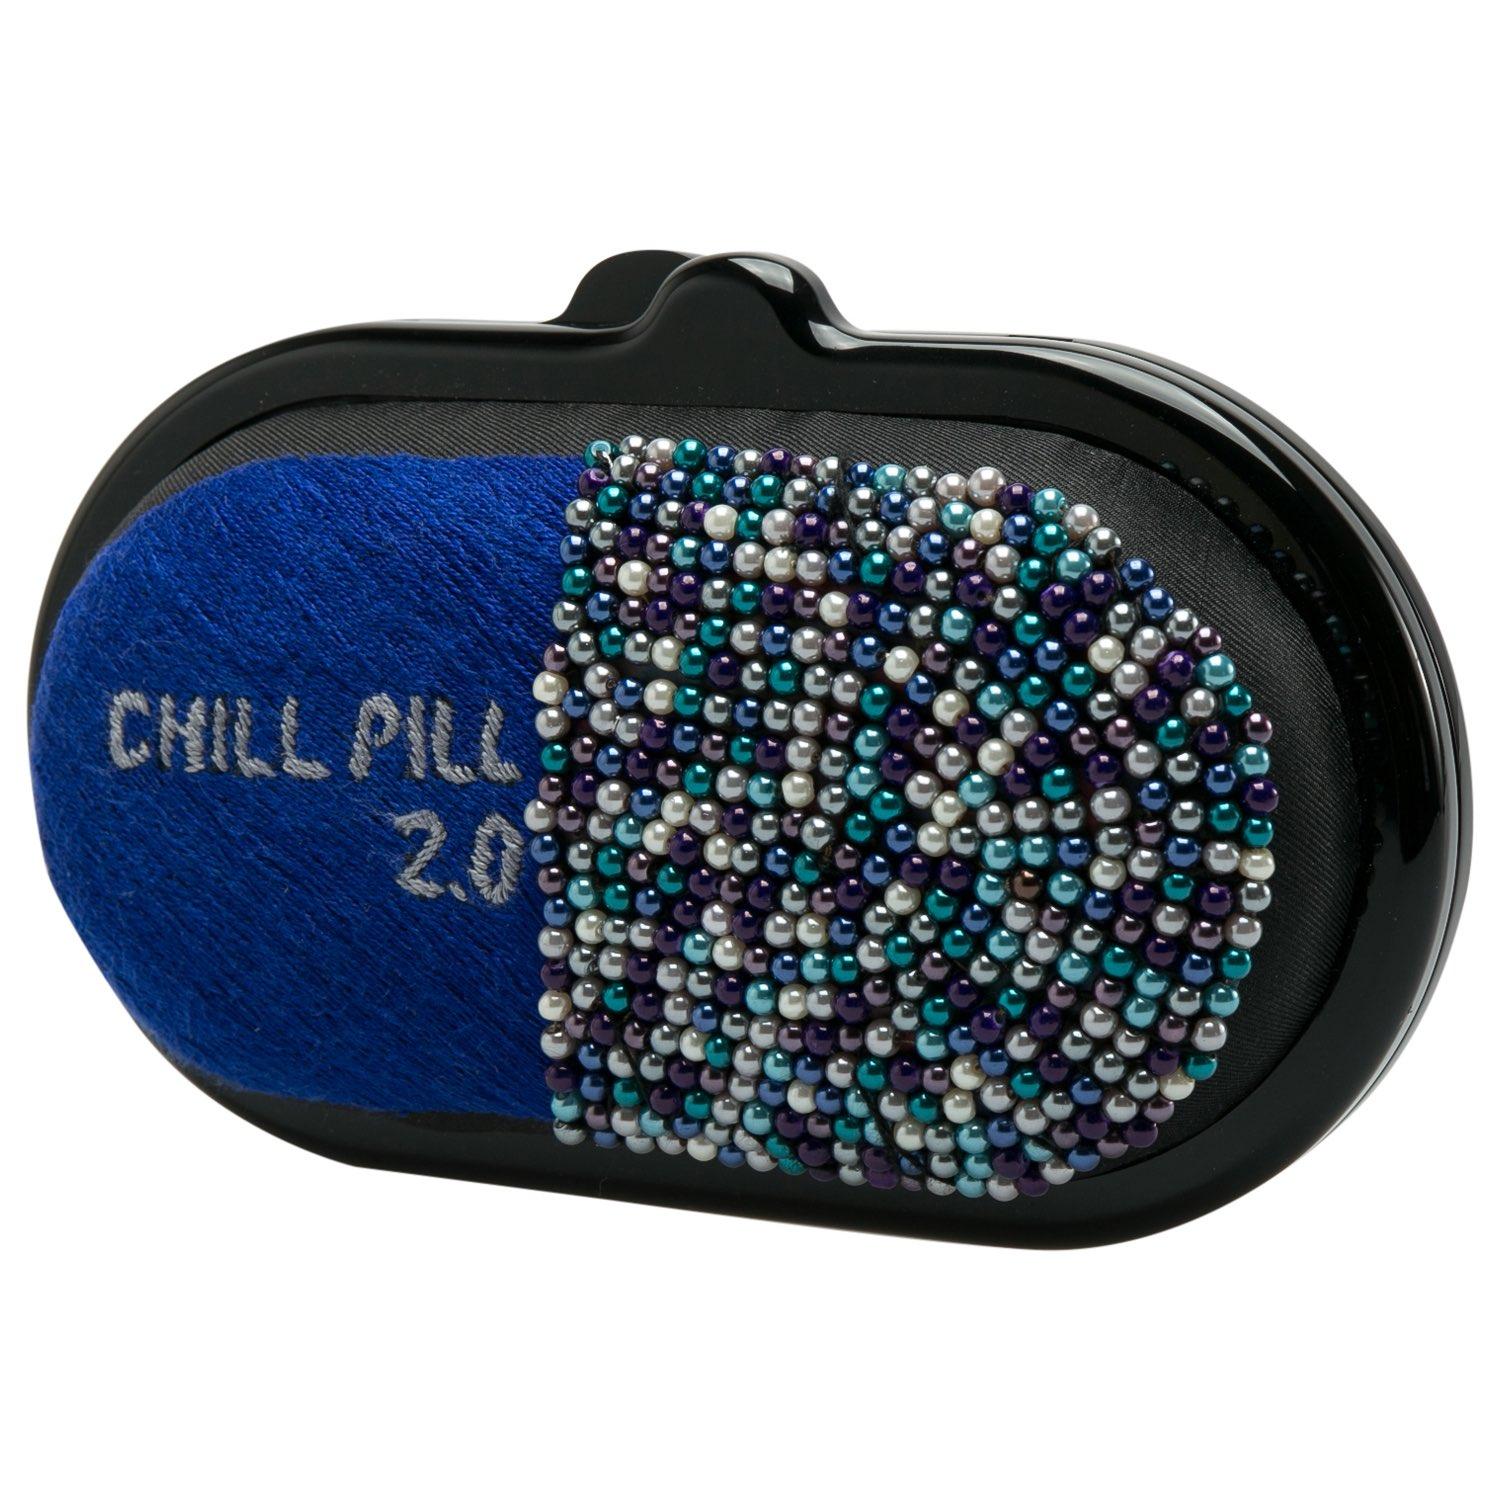 Sarah's Bag Blue/Multicolor Beaded Fabric Chill Pill 2.0 Chain Clutch 1